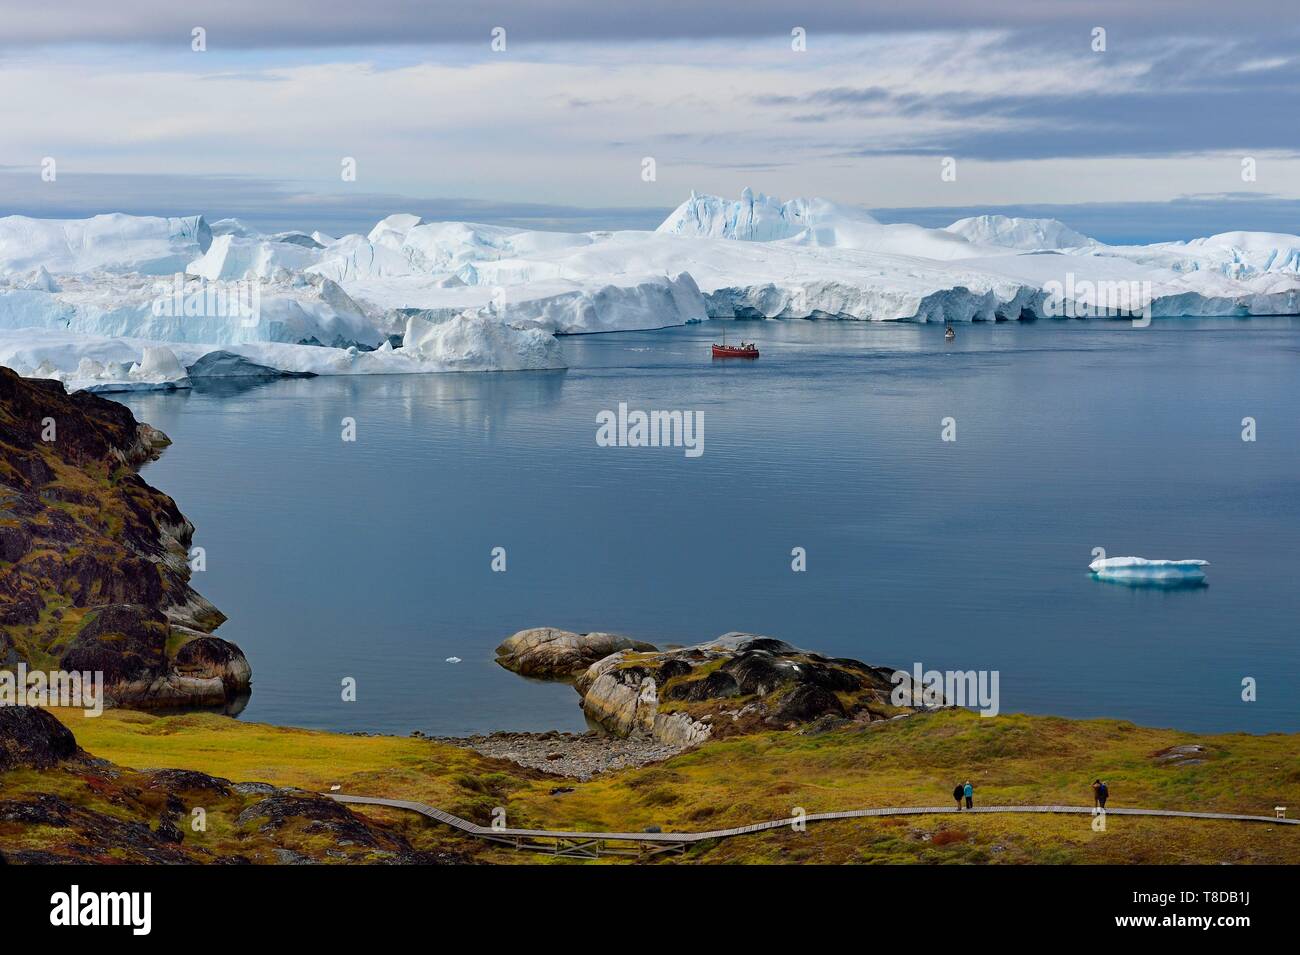 Greenland, west coast, Disko Bay, Ilulissat, icefjord listed as World heritage by UNESCO that is the mouth of the Sermeq Kujalleq Glacier (Jakobshavn Glacier), hiking on the wooden walkway going to the Sermermiut site and fishing boat at the foot of icebergs Stock Photo